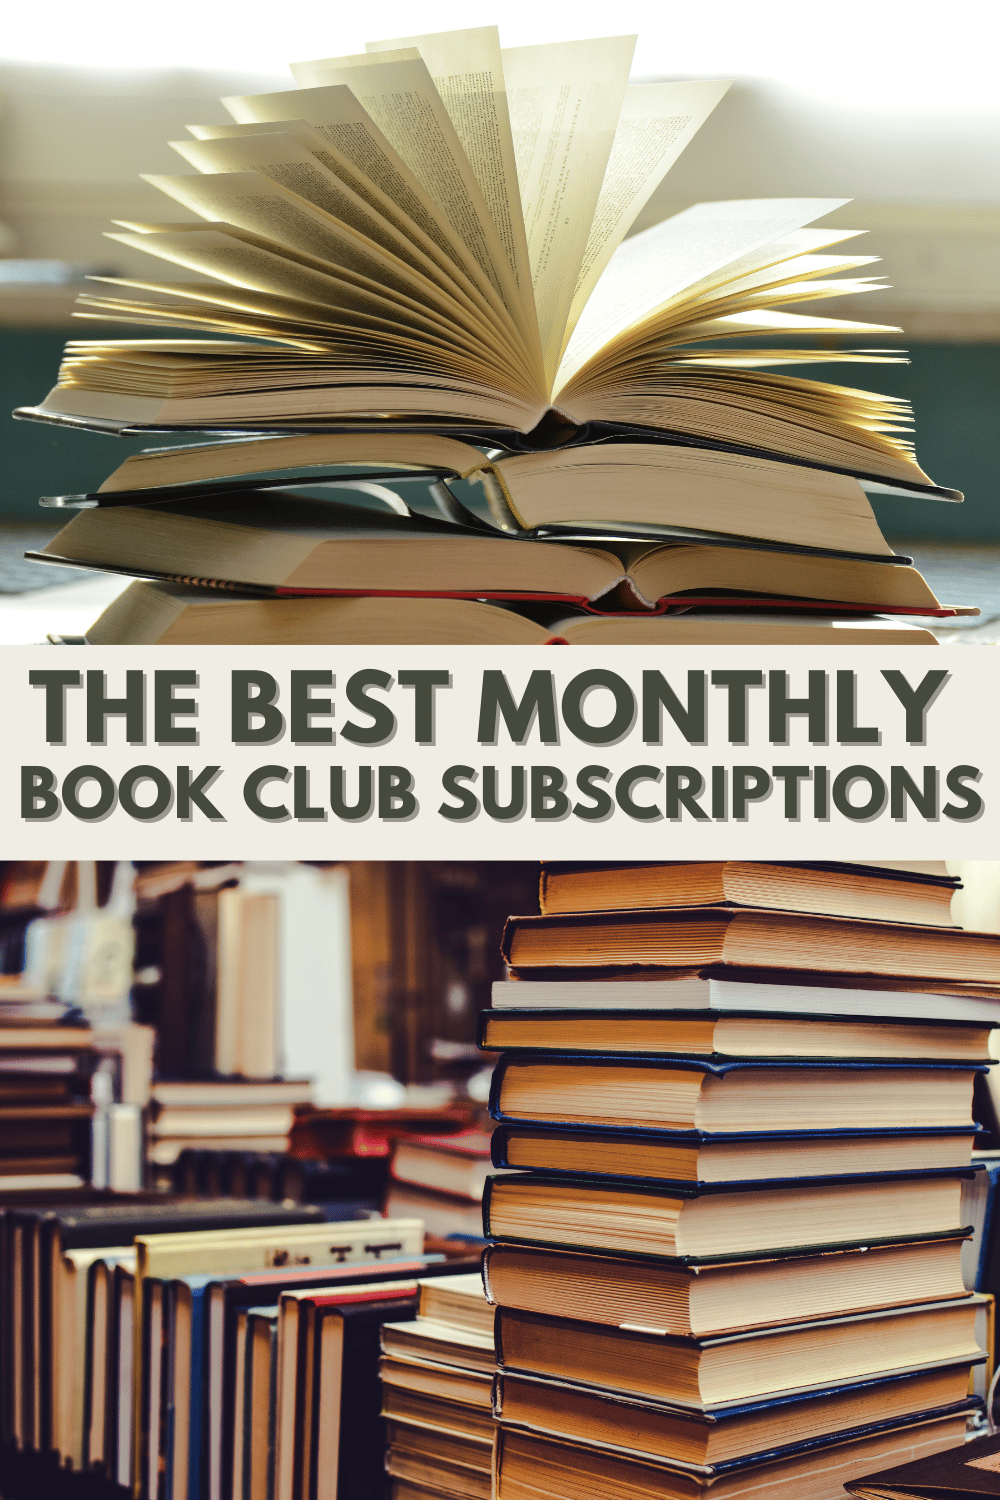 Monthly book club subscriptions are a great way for book lovers to find new reading material, especially since there are so many clubs to choose from. #bookclub #bookclubsubscriptions #bookclubpicks #bookclubreads via @wondermomwannab